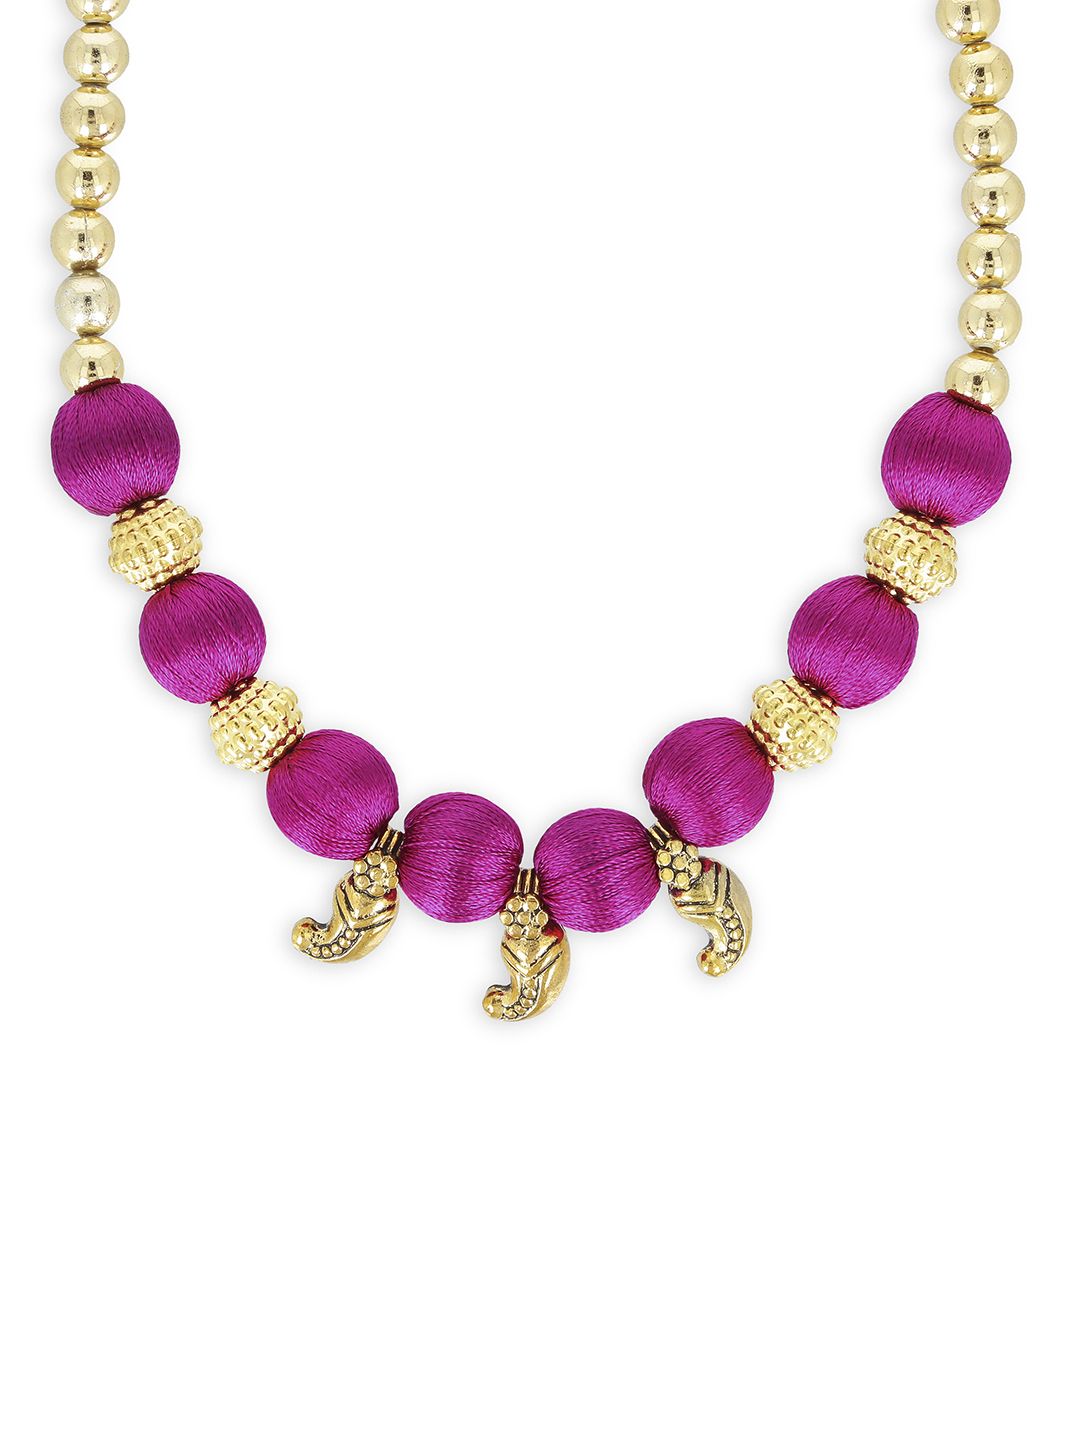 AKSHARA Girls Pink & Gold-Toned Handcrafted Necklace Price in India